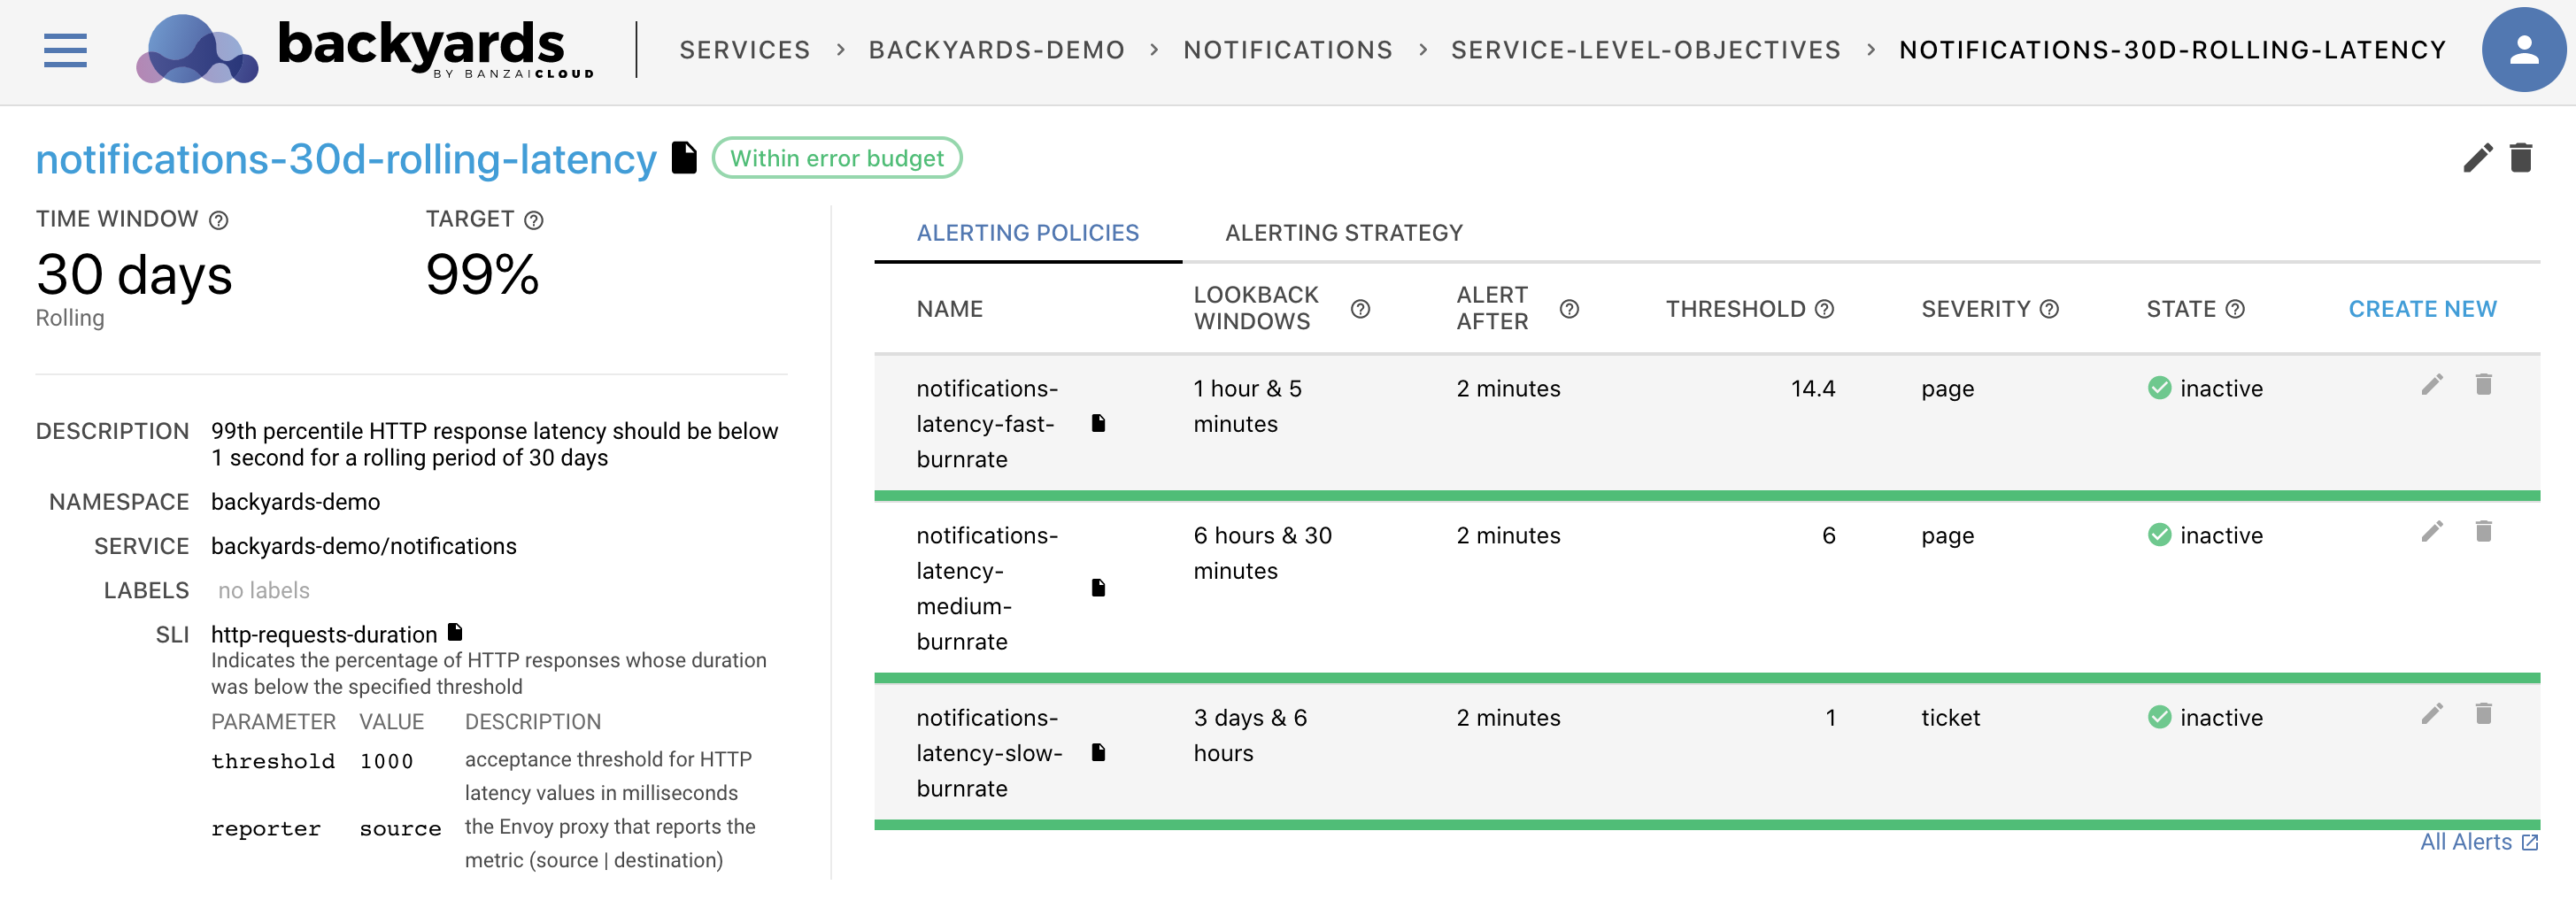 Backyards: tracking and enforcing, that 99% of requests to be answered within 1s